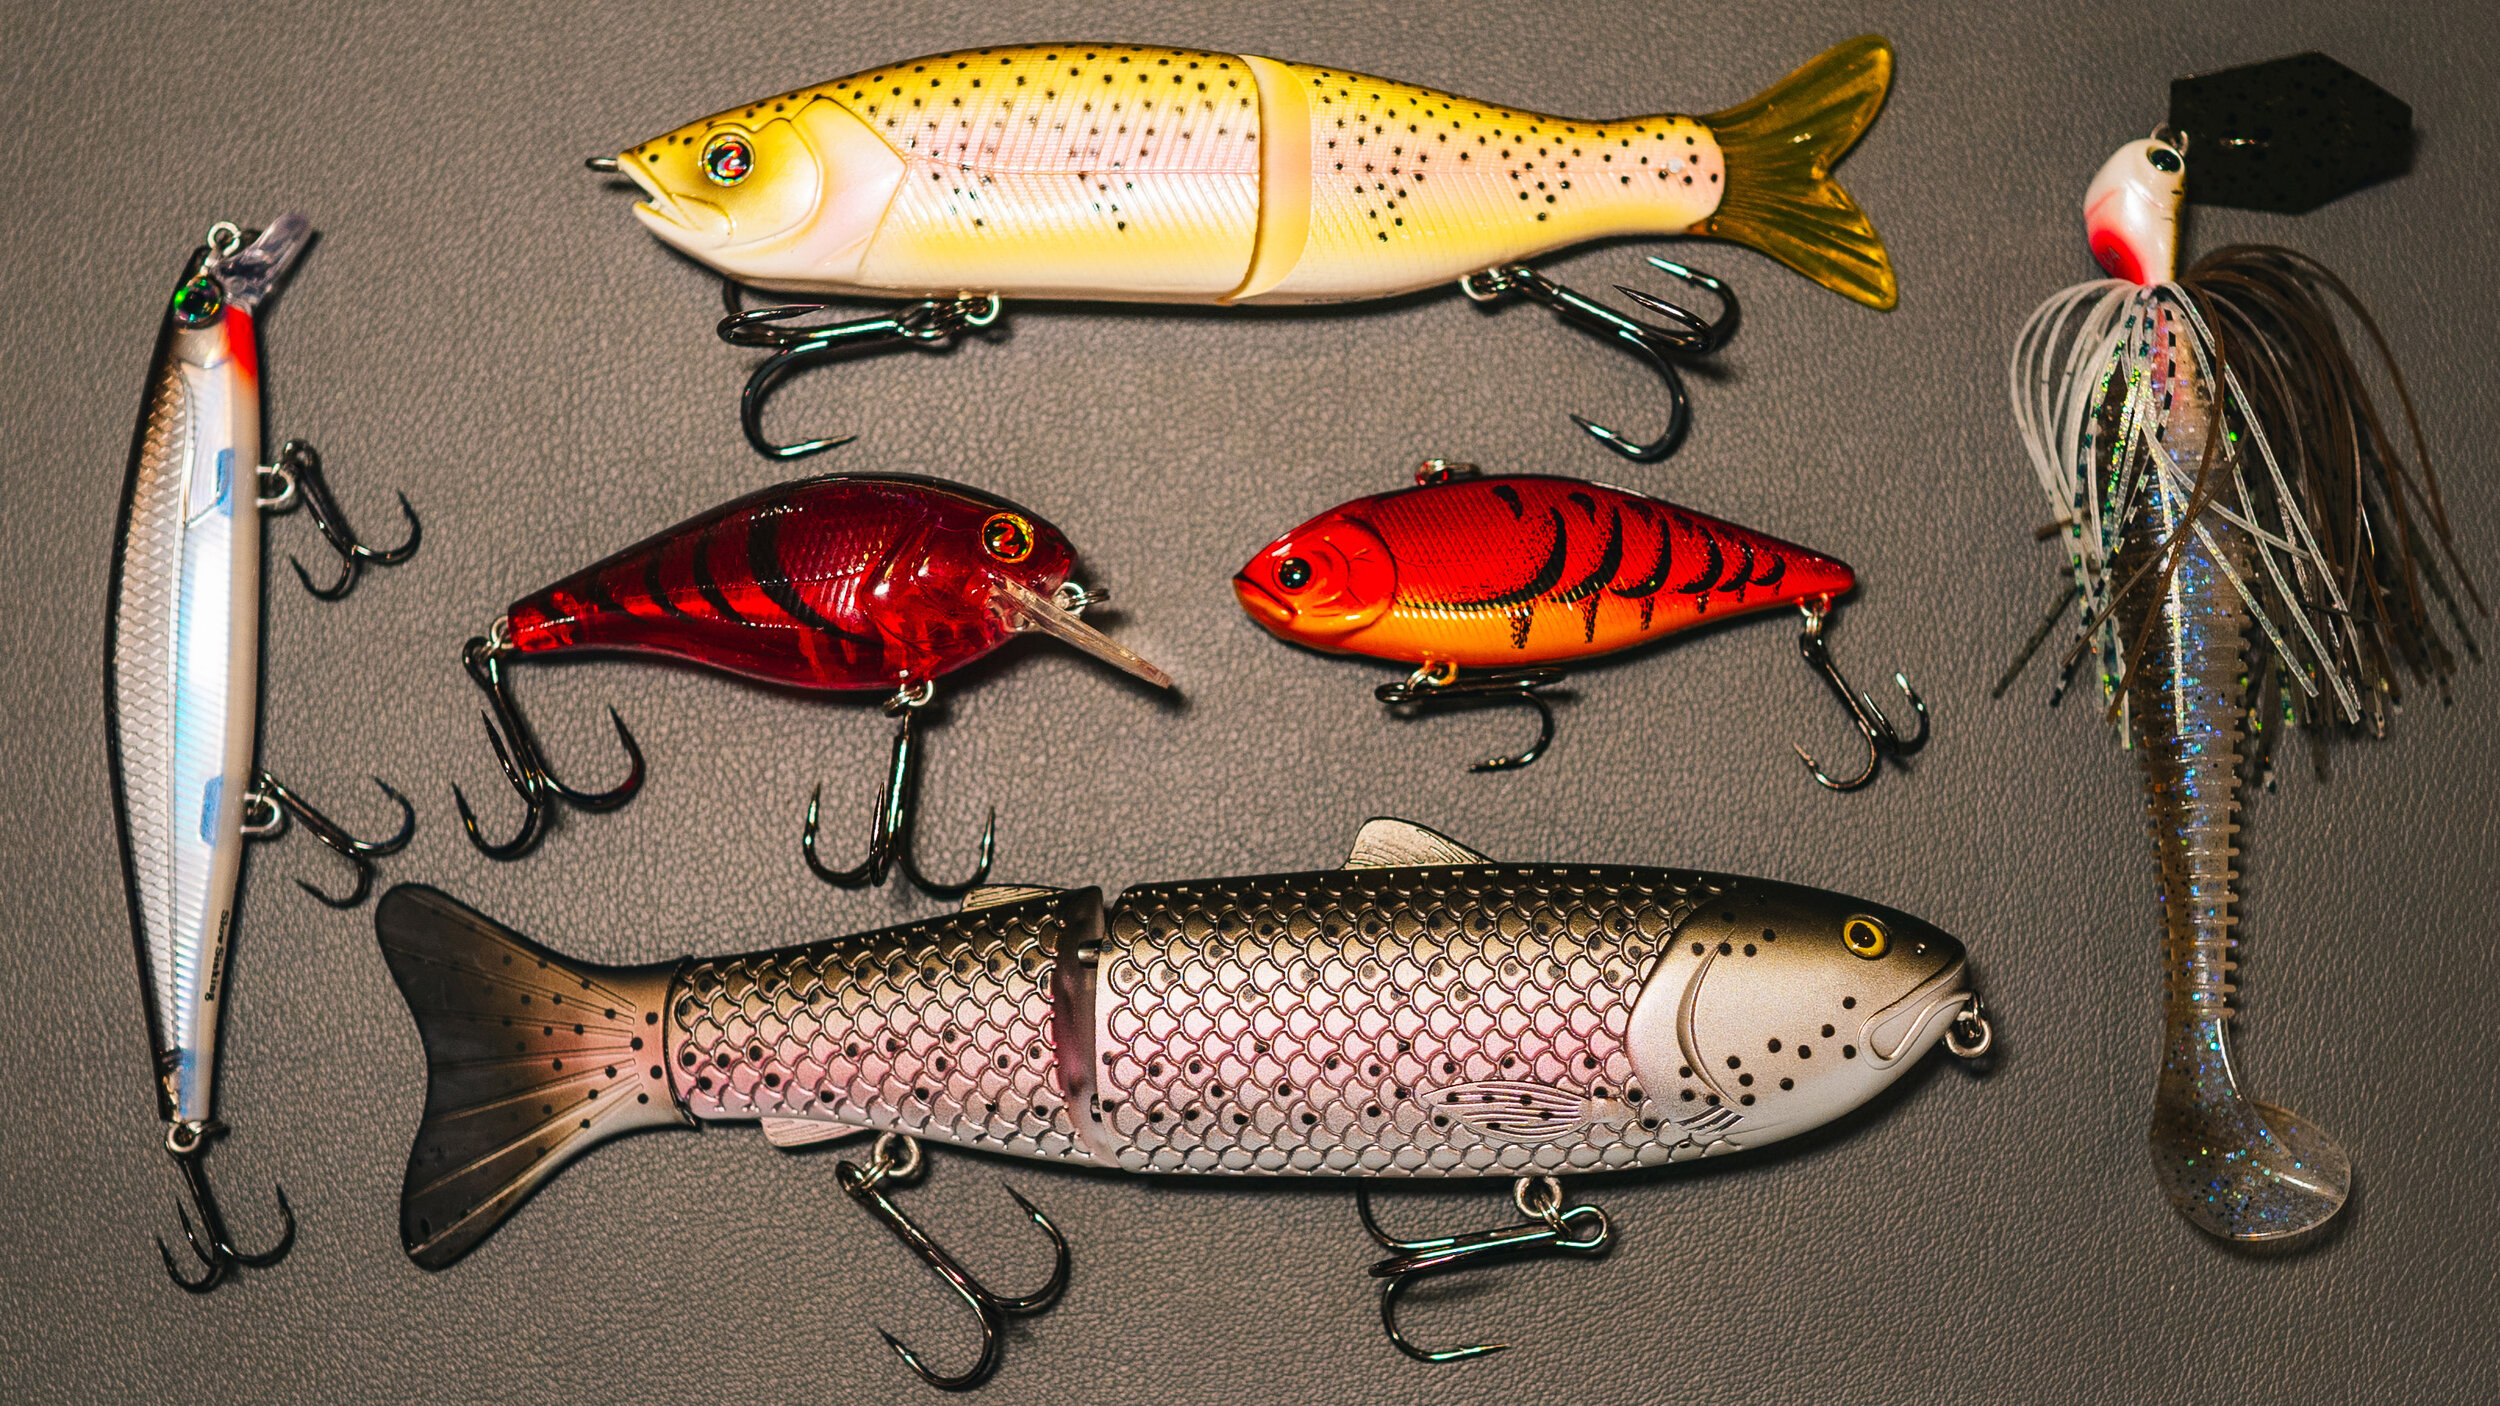 Top 5 Baits For Early Spring Bass Fishing! — Tactical Bassin' - Bass Fishing  Blog